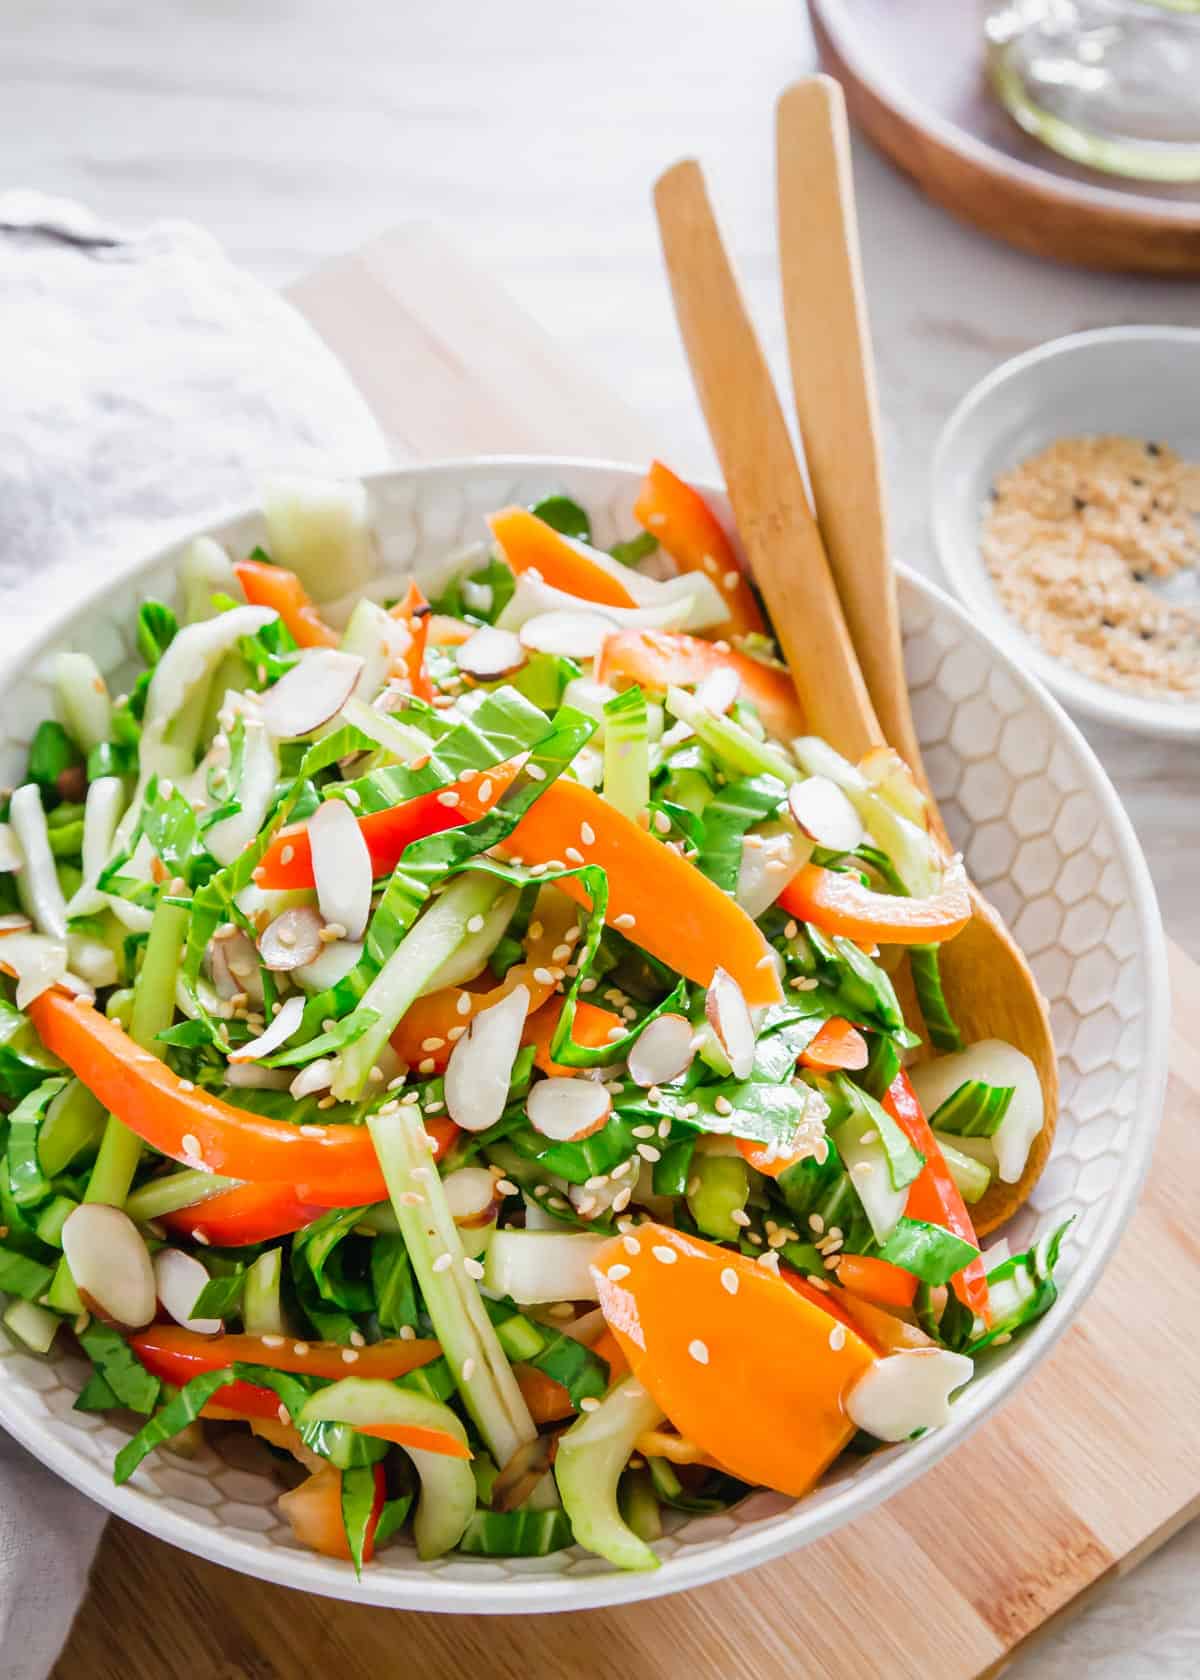 Crispy and crunchy bok choy salad with red peppers and carrots in an Asian inspired sesame soy dressing.